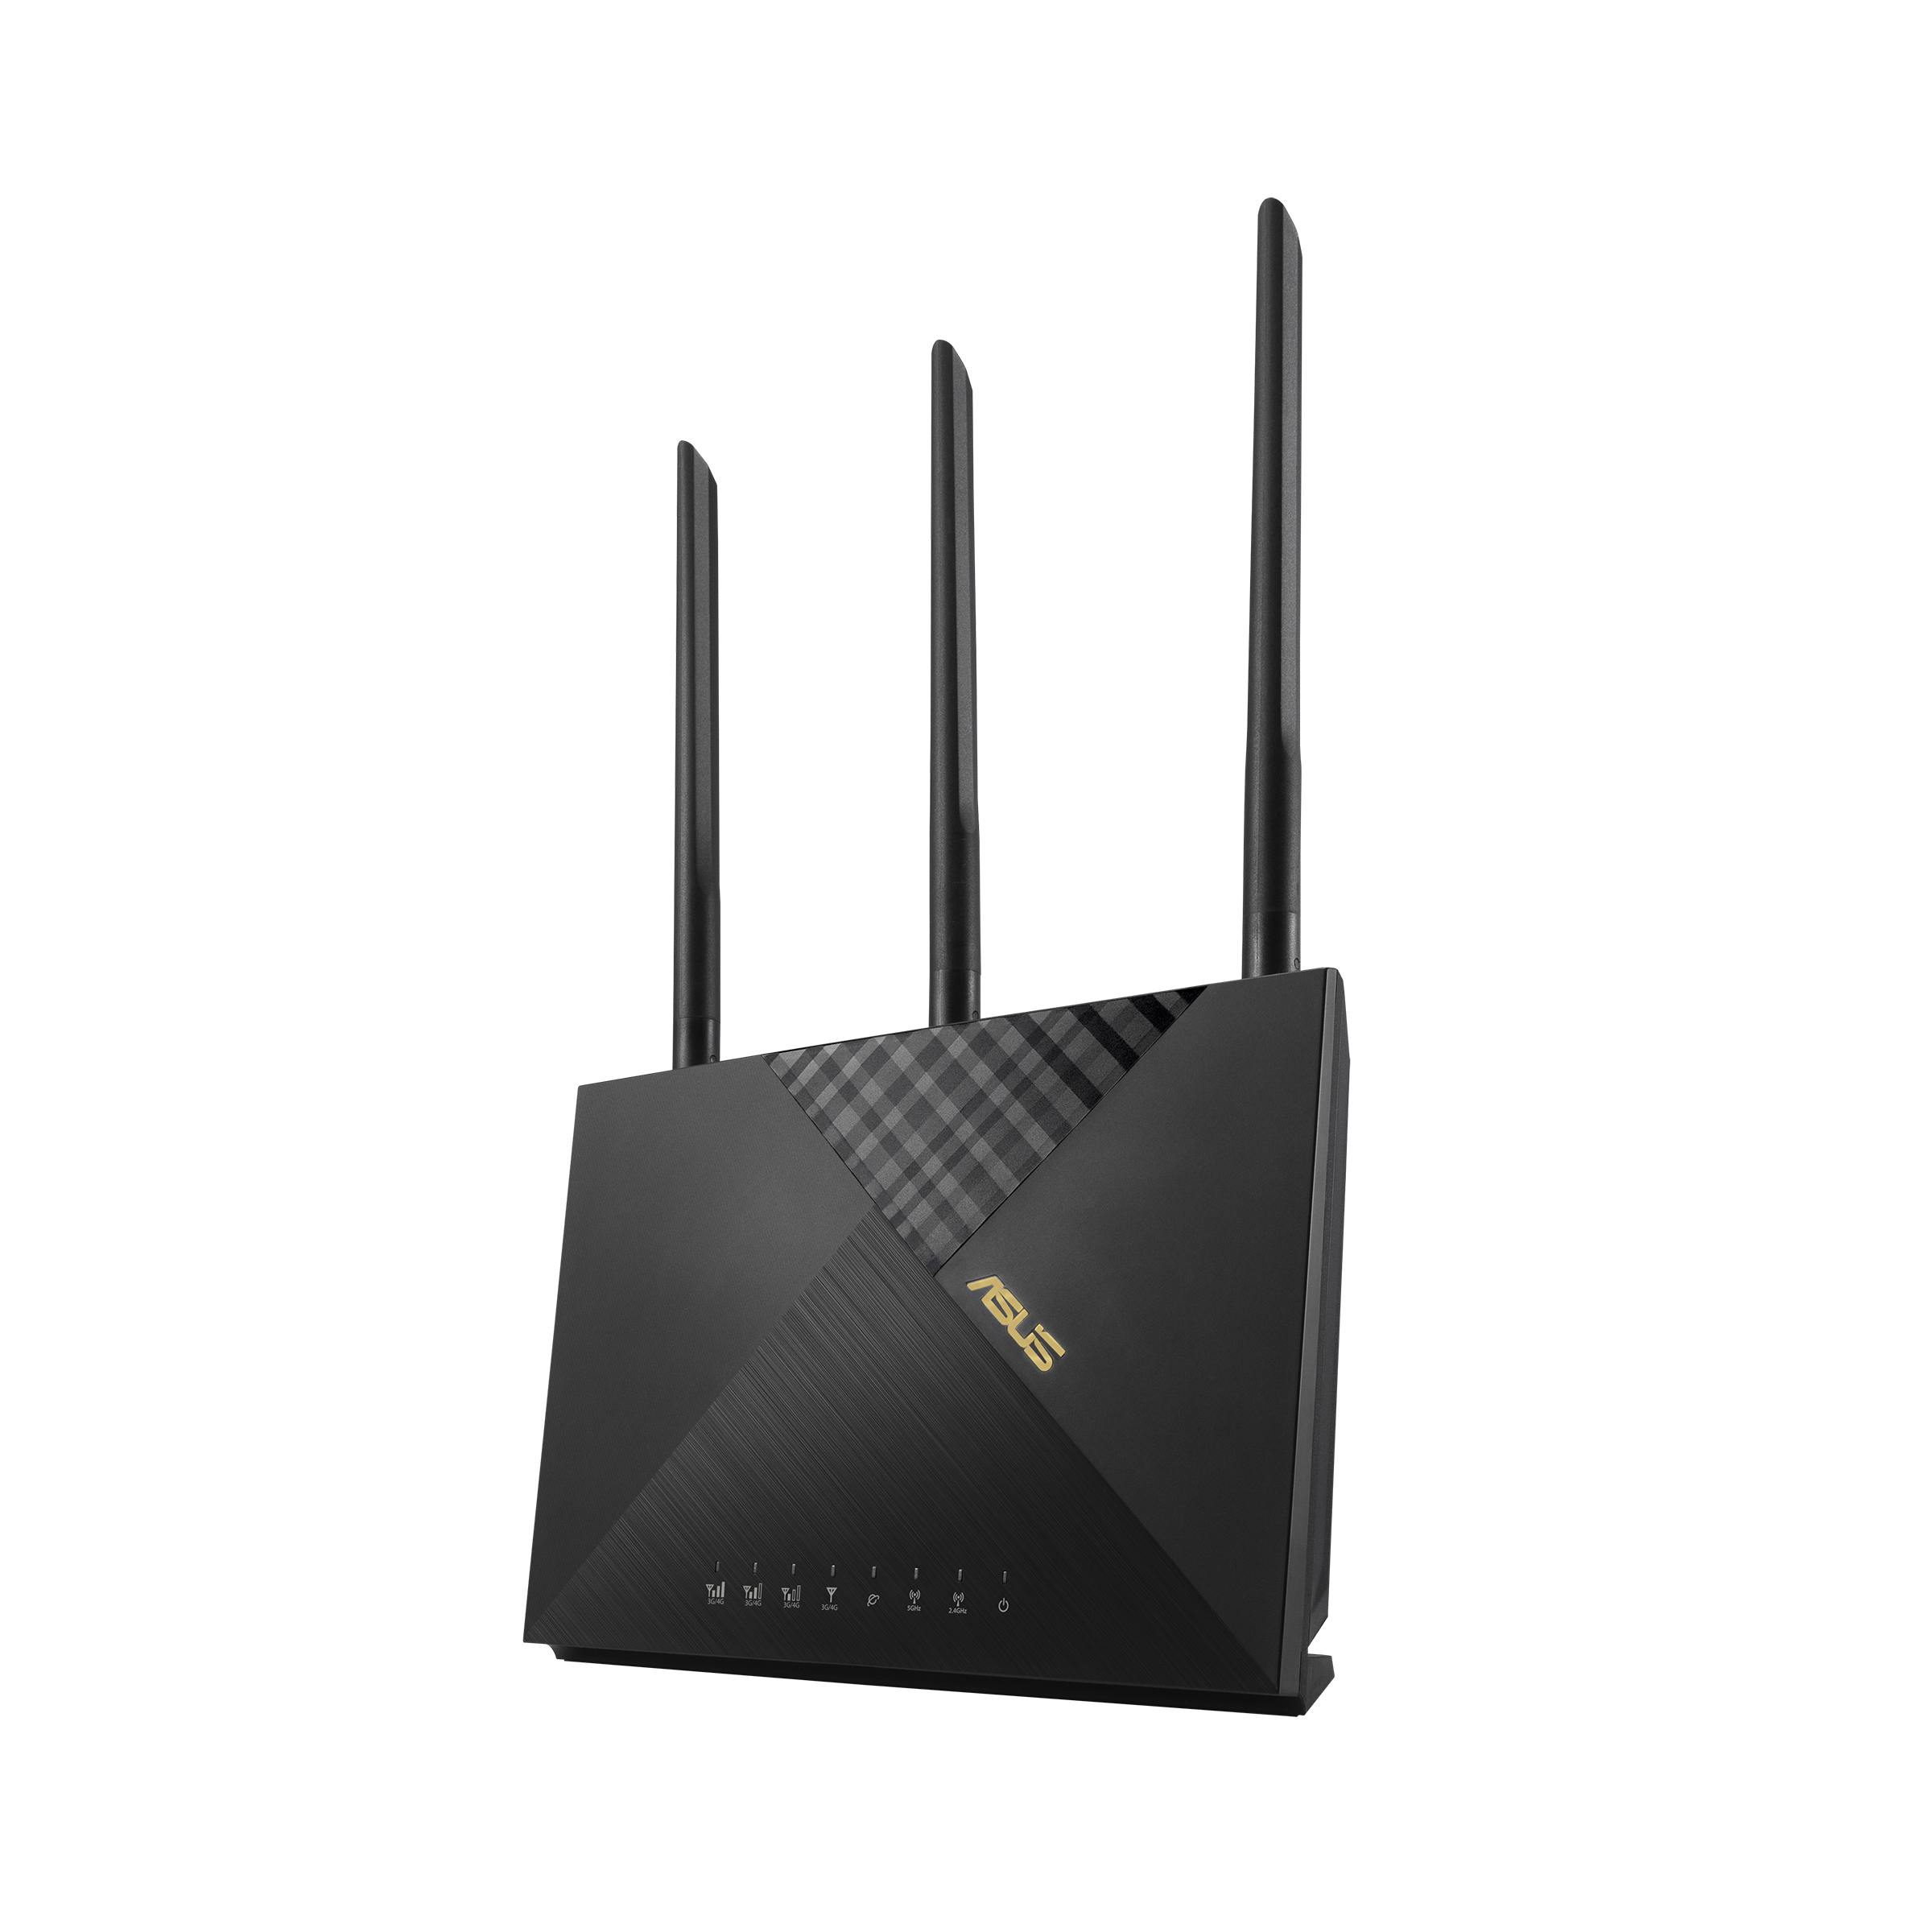 Asus - Router ASUS 4G-AX56 4G LTE Dual-Band Wireless AX1800